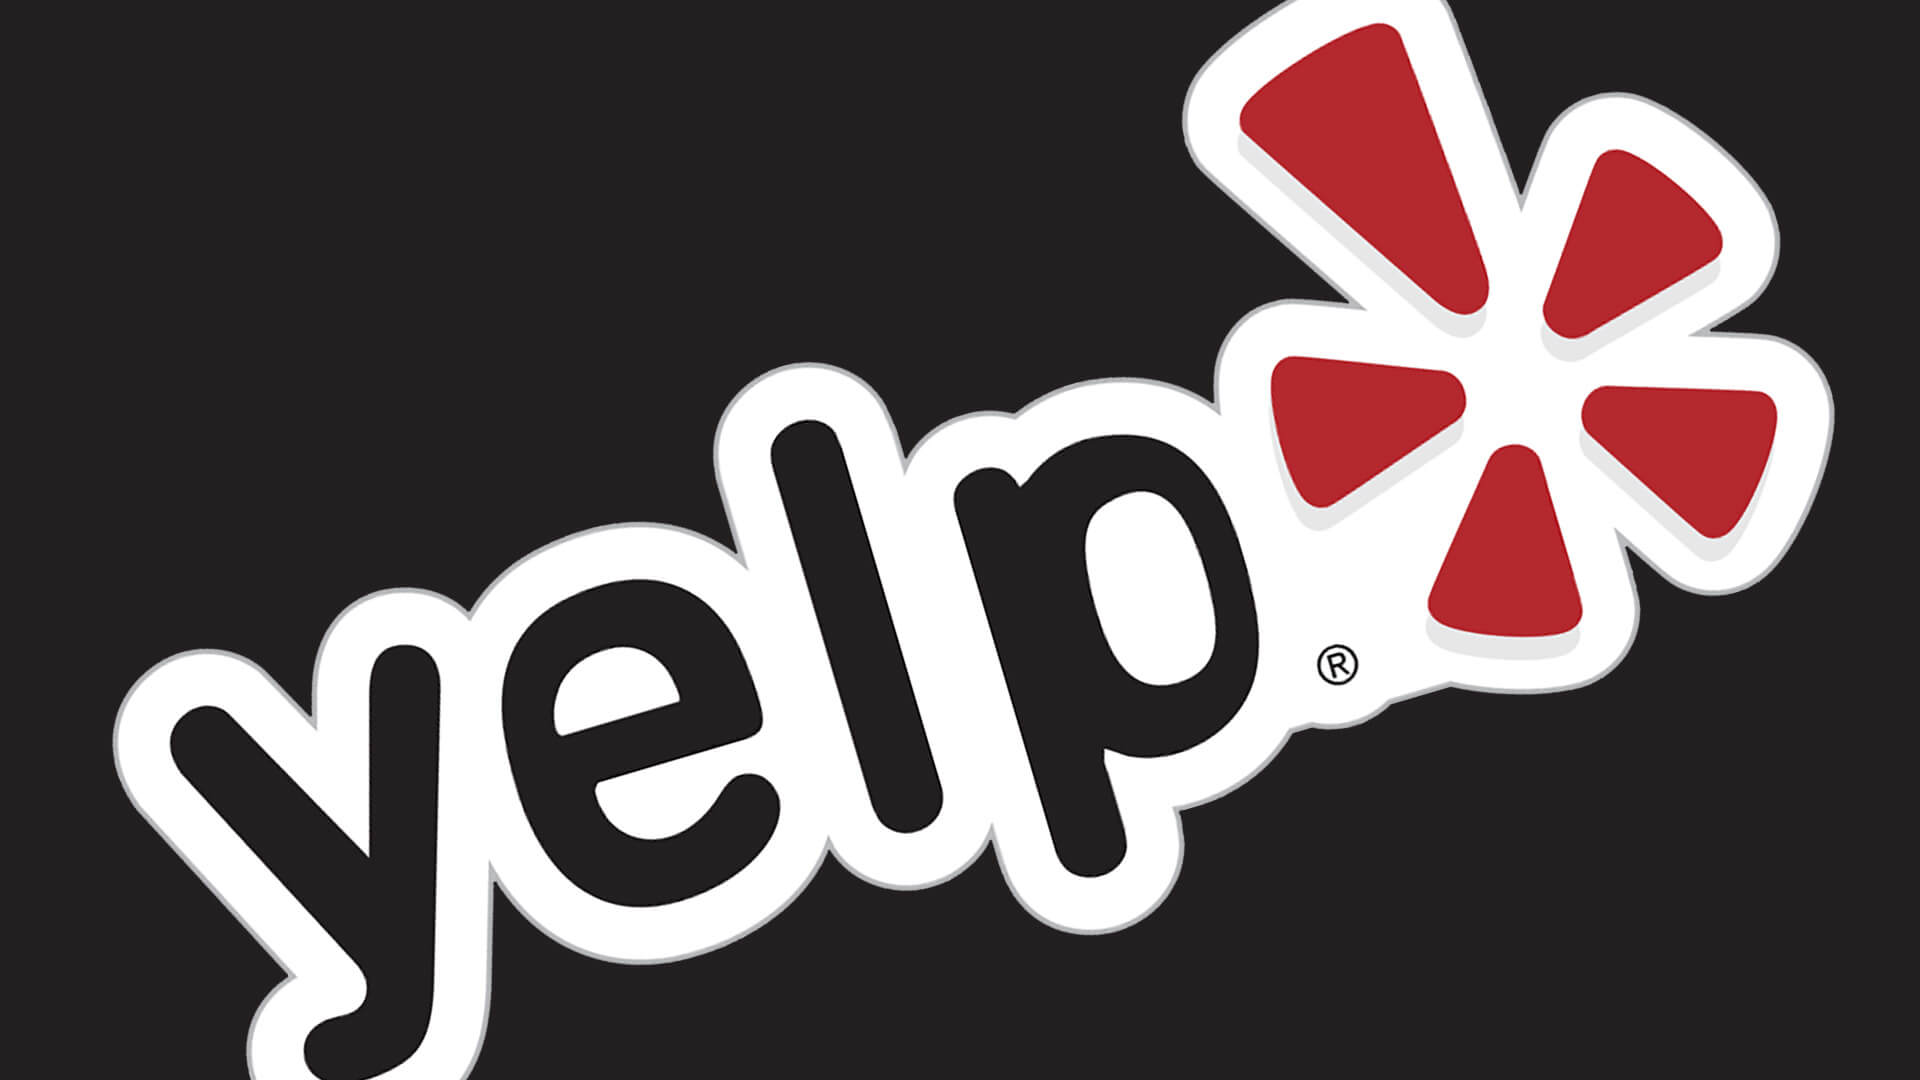 Yelp Turns Up The Heat: 285 Consumer Alerts Issued Over Fake Reviews